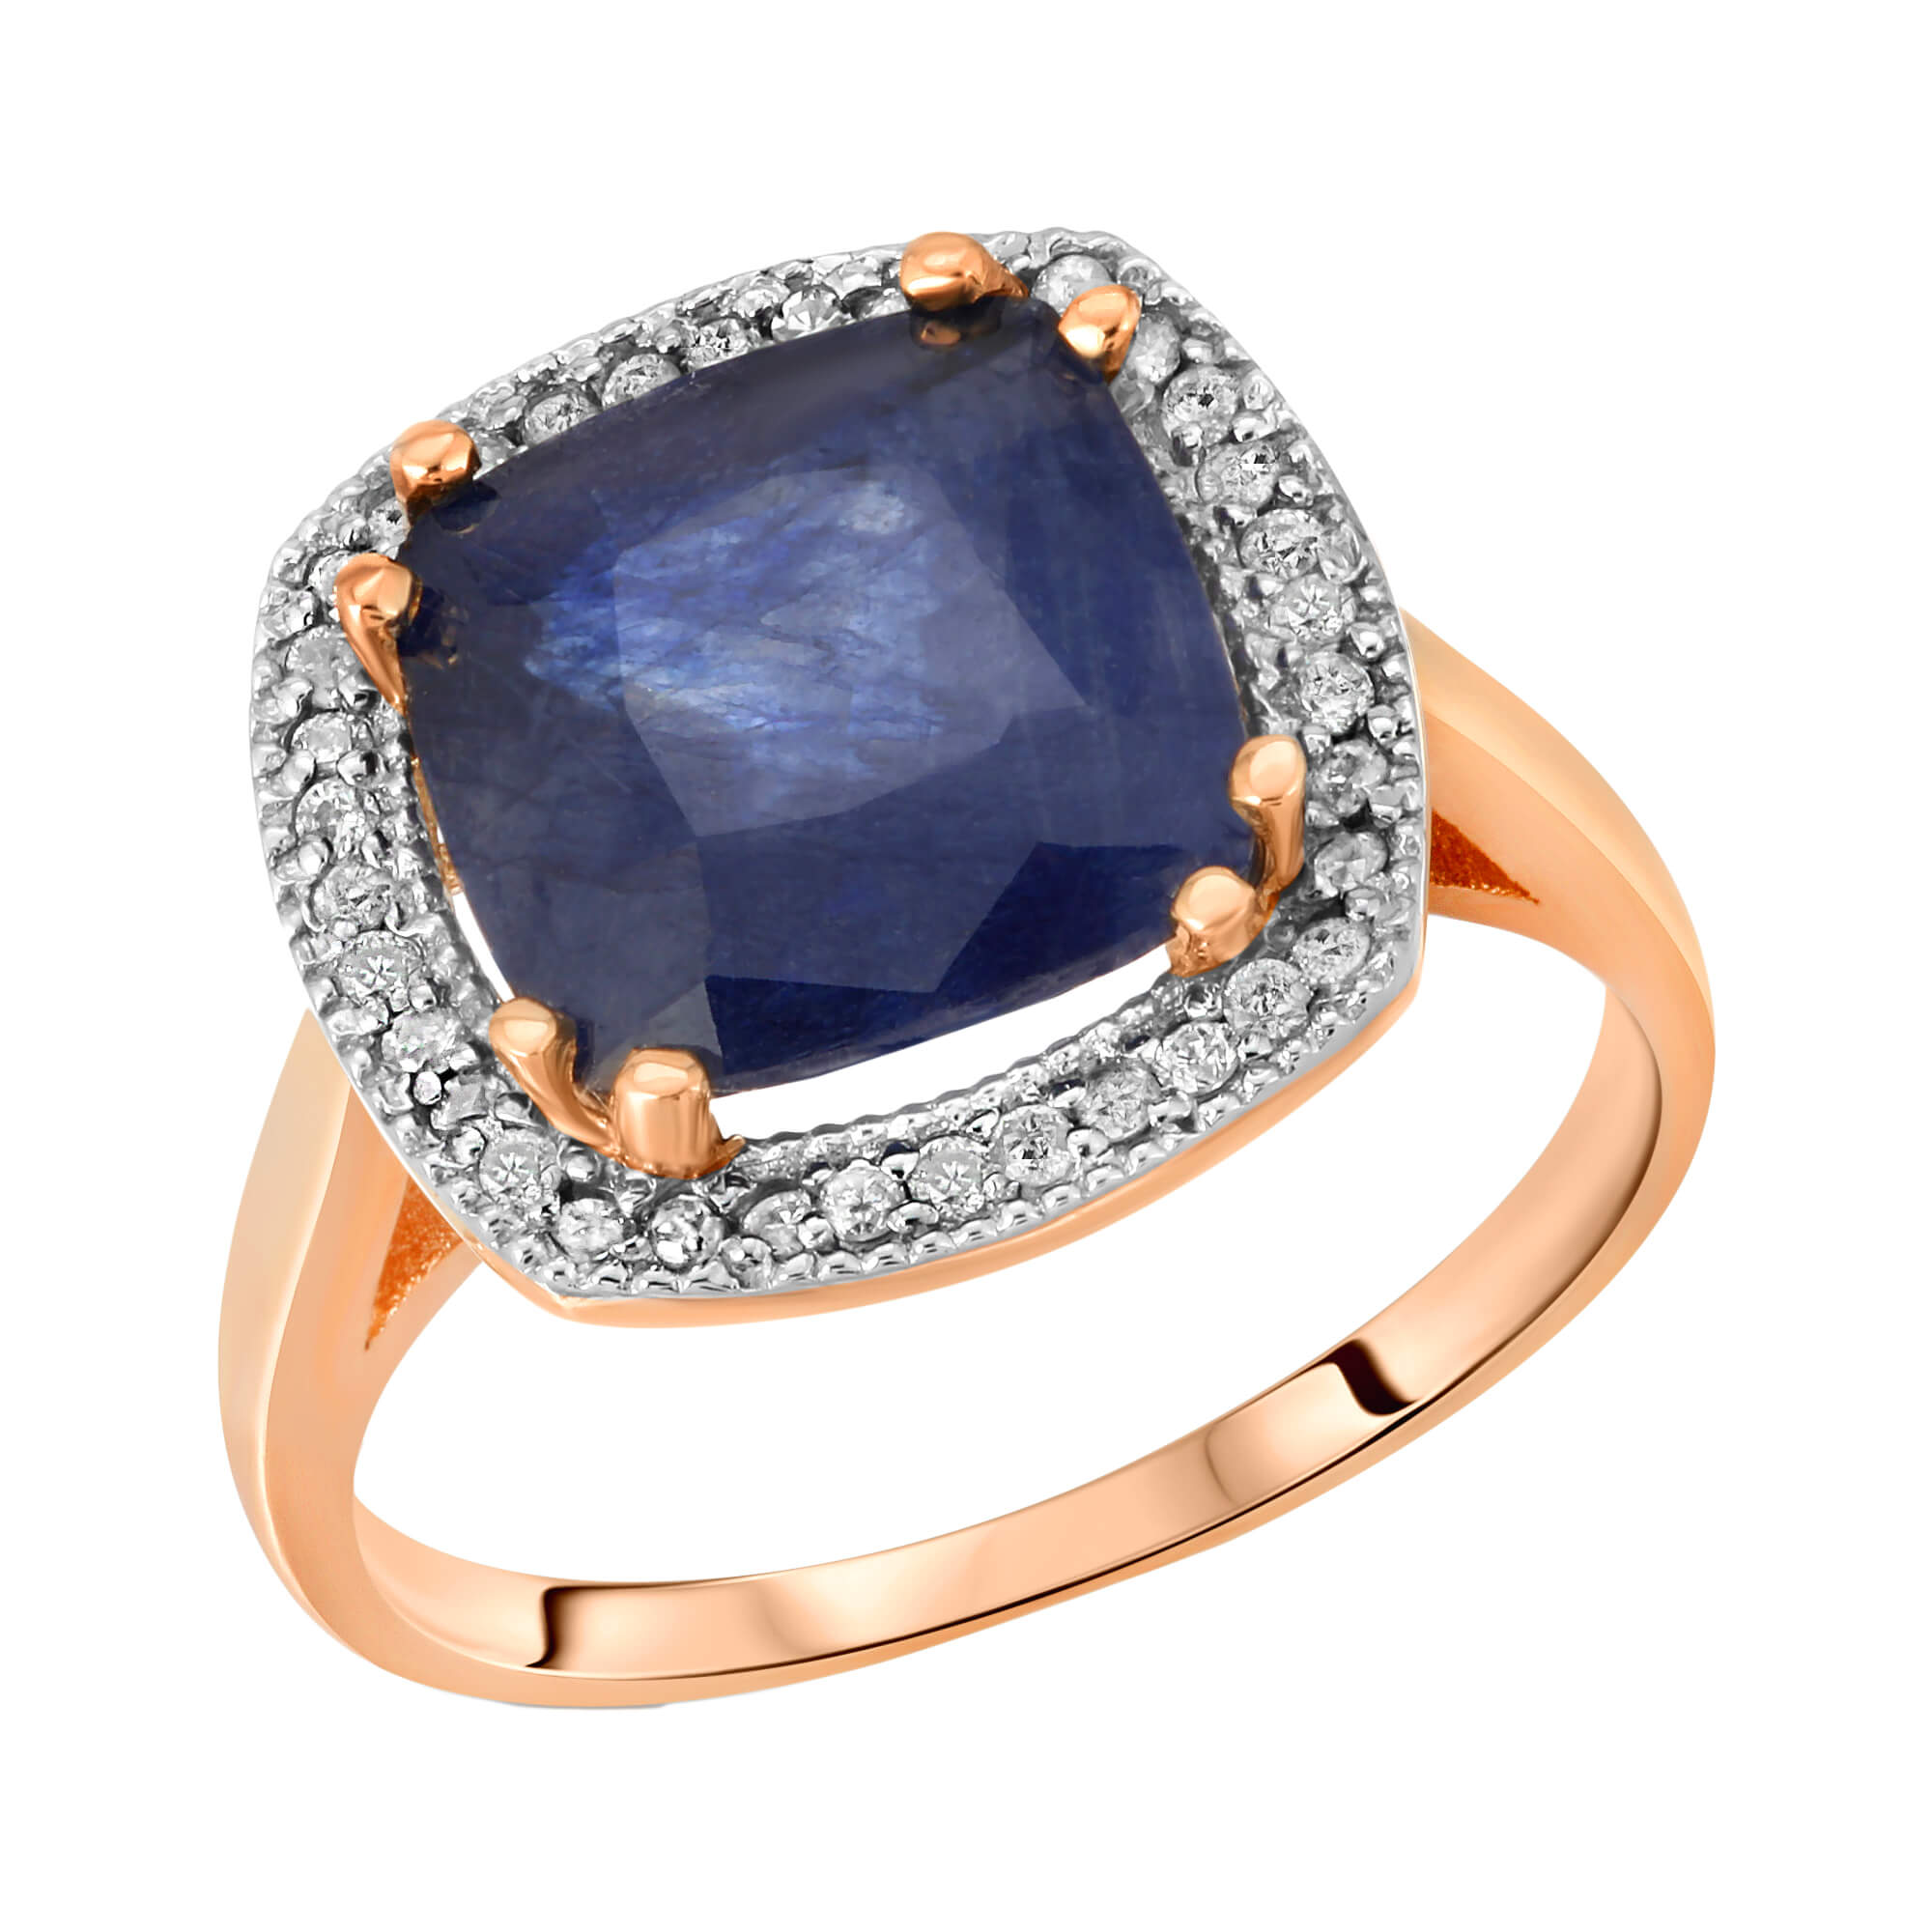 Cushion Cut Sapphire Ring 5.9 ctw in 18ct Rose Gold